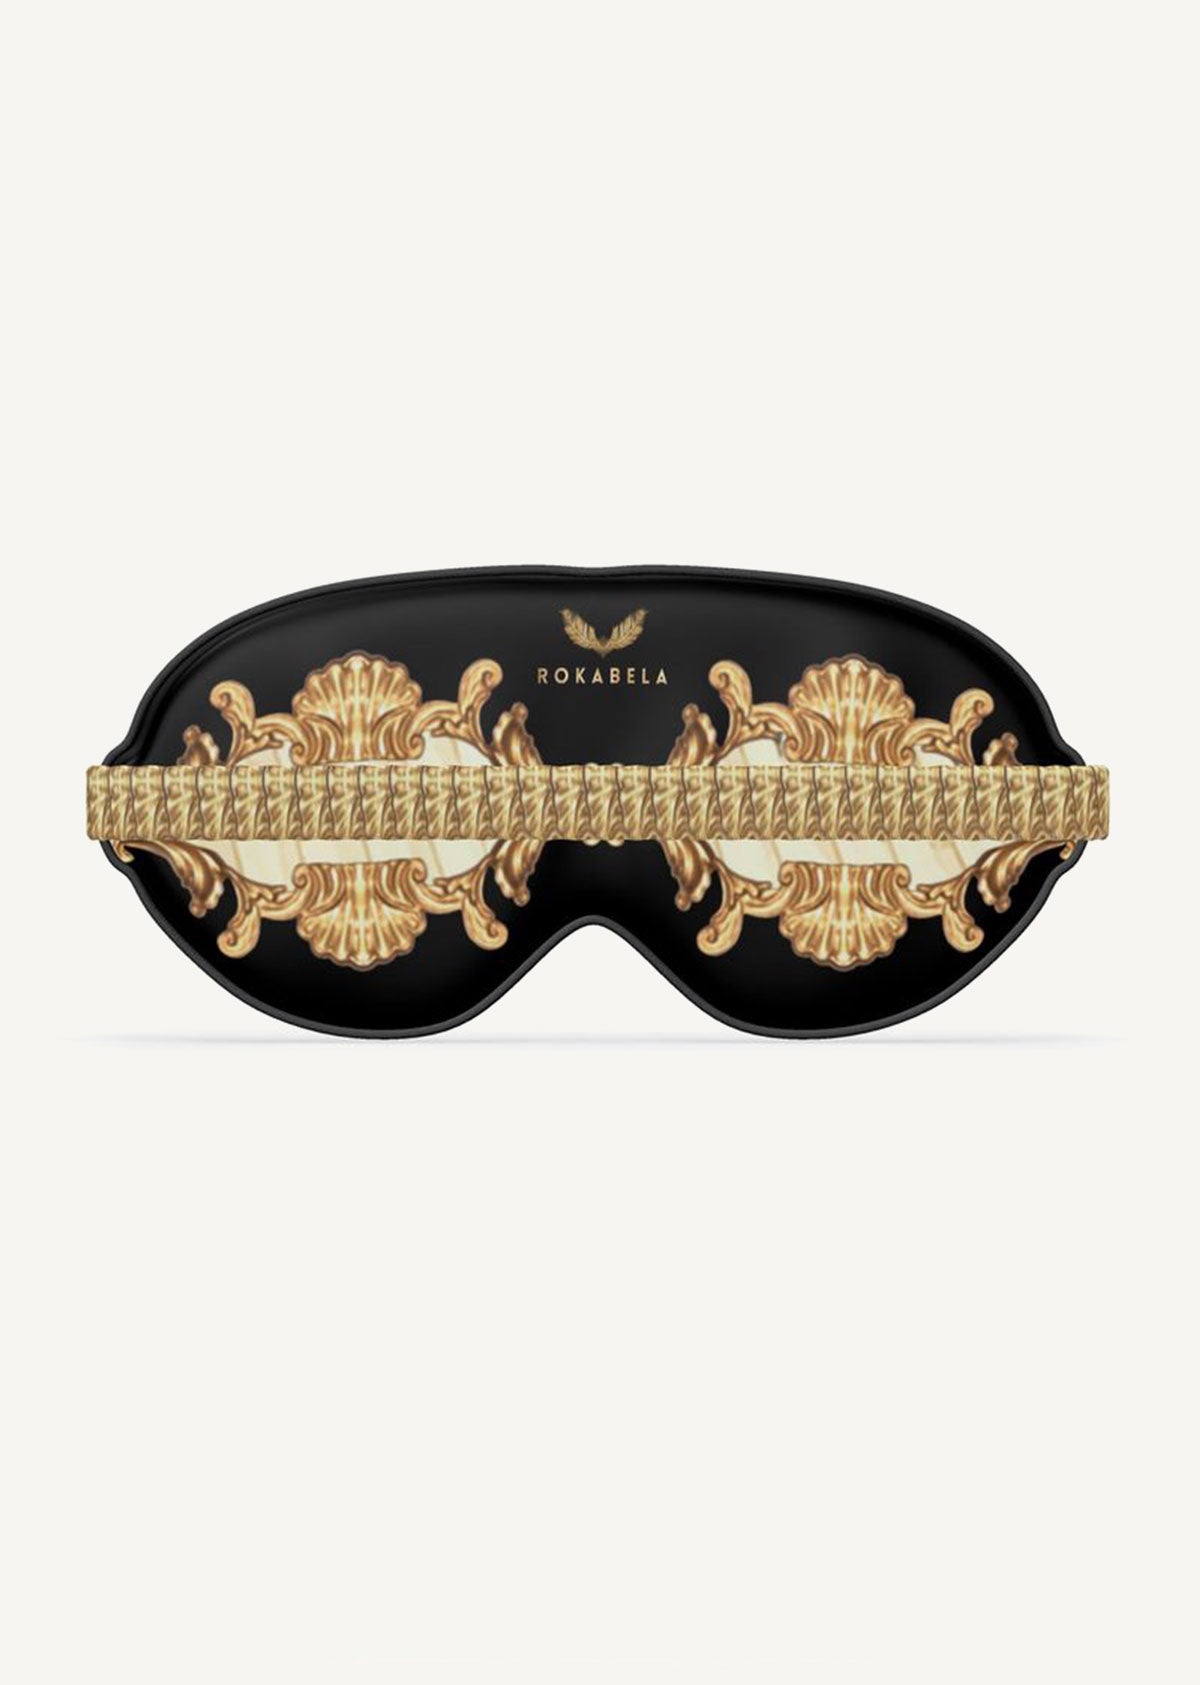 Designer luxury Silk Sleep Eye Mask. Exclusive design featuring Rococo style detail in gold with palm design in soft cream. The perfect designer gift.